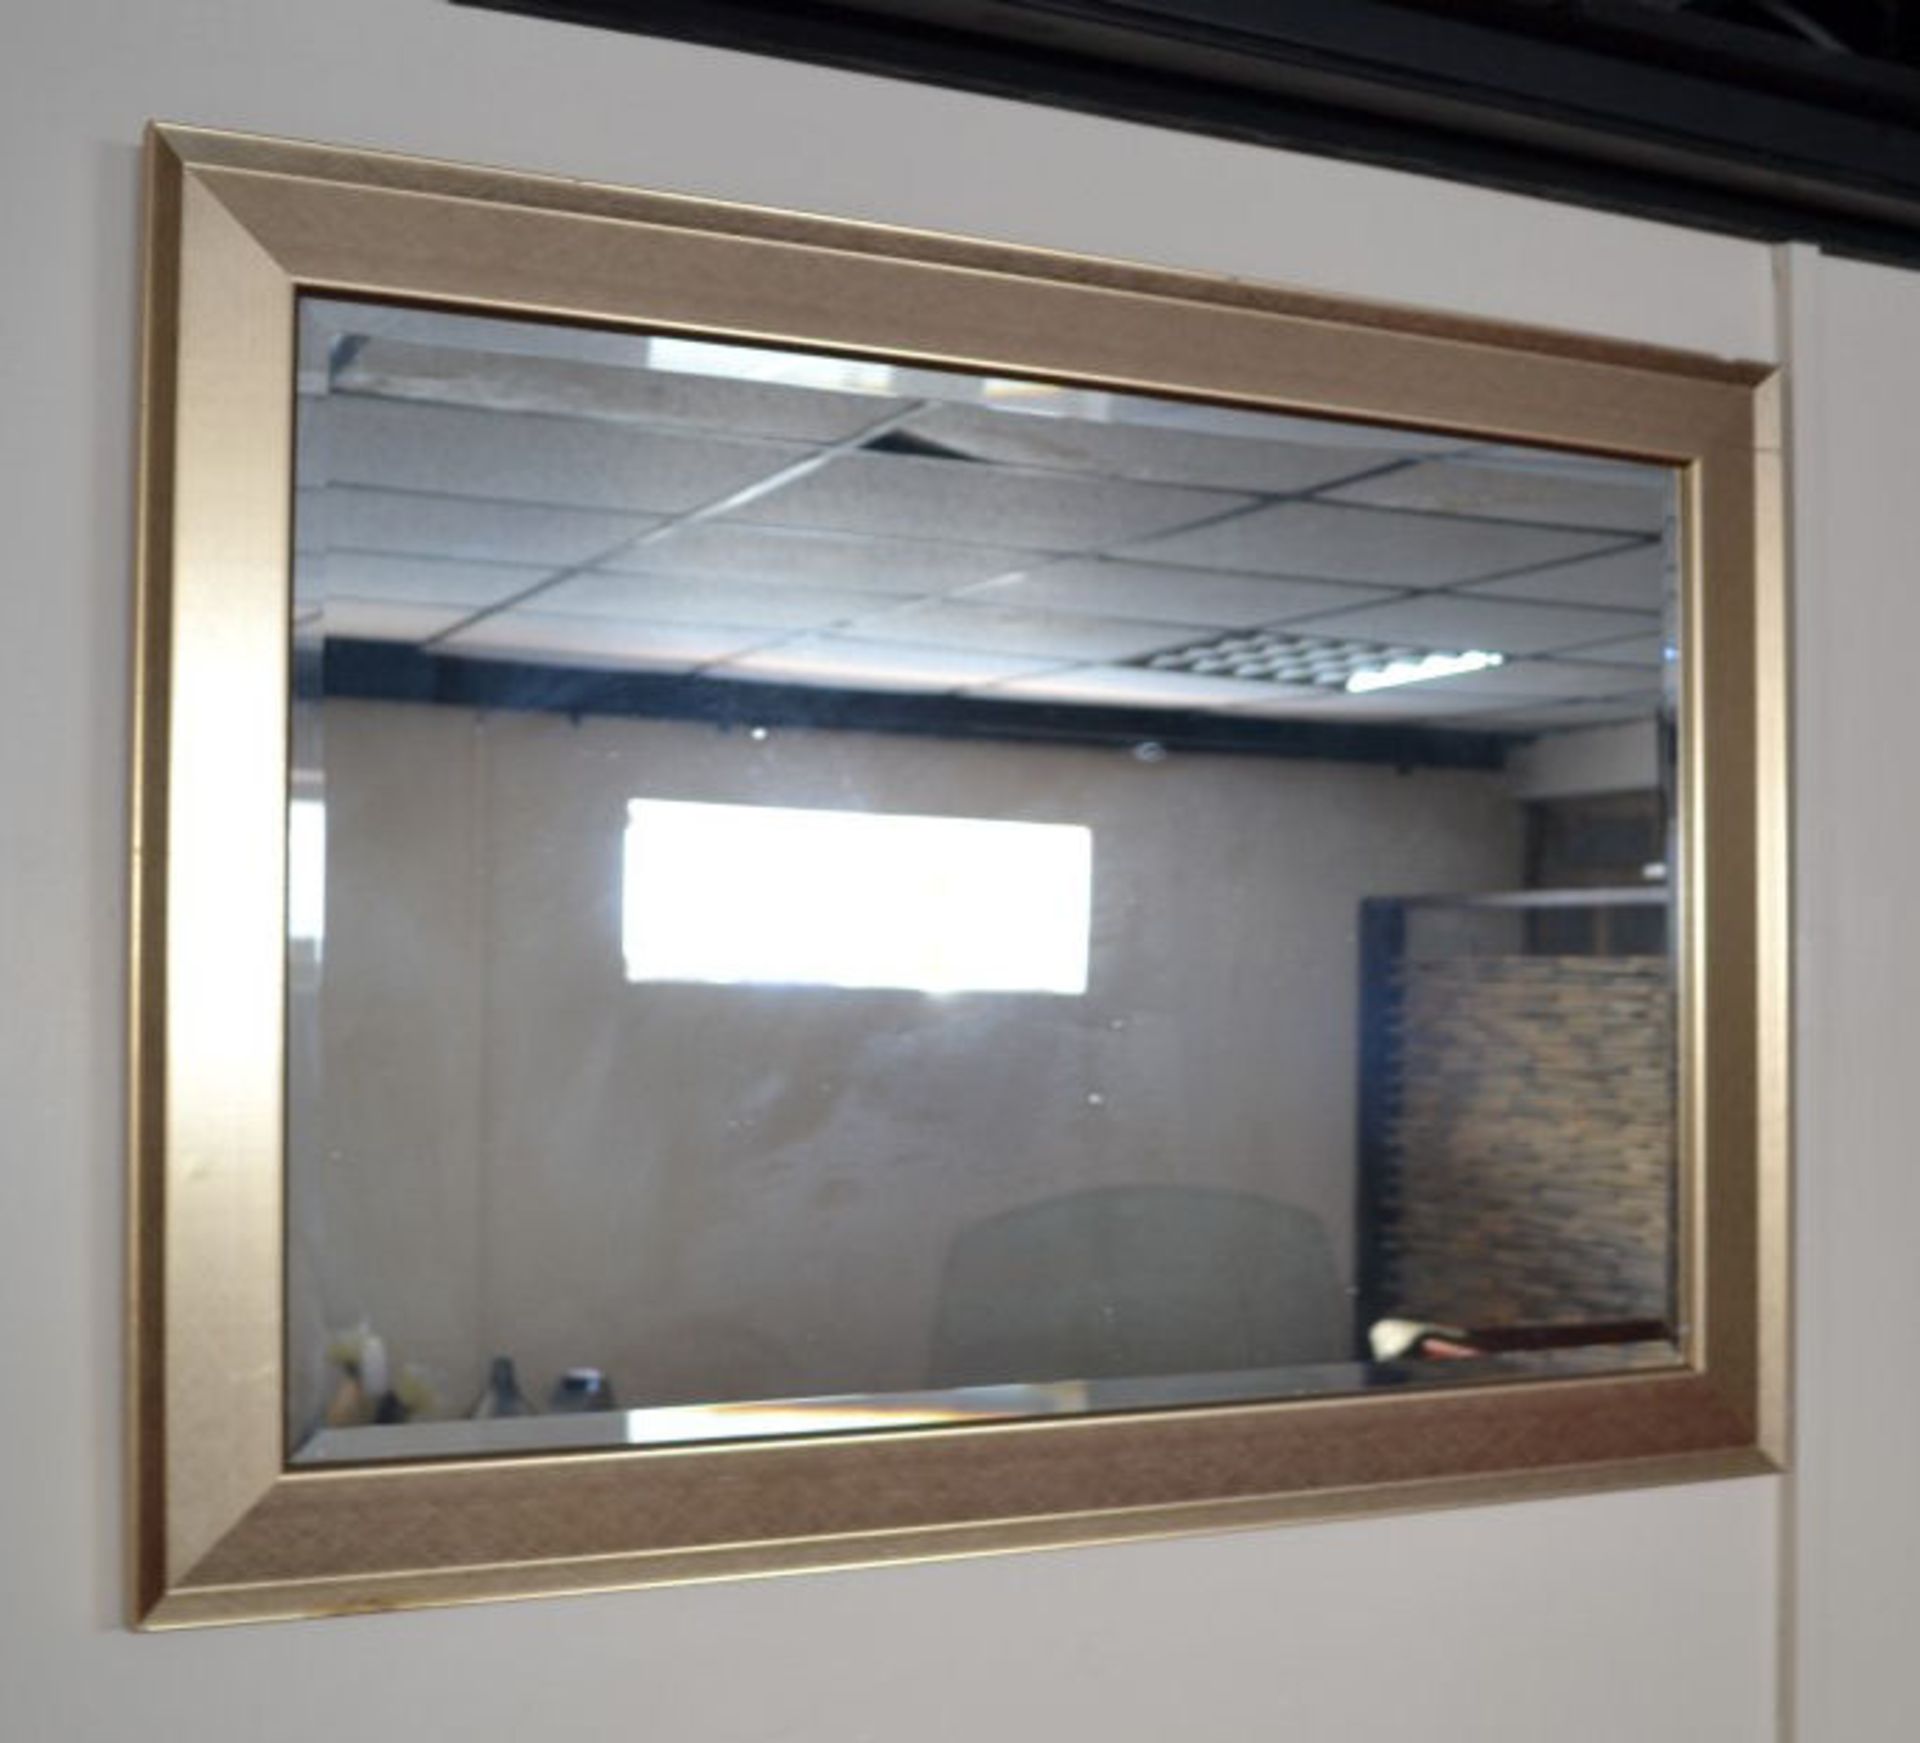 1 x Gold Surround Mirror. 105cm Long. 75cm Tall. Frame Is Around 7.5cm Wide. - Image 2 of 6